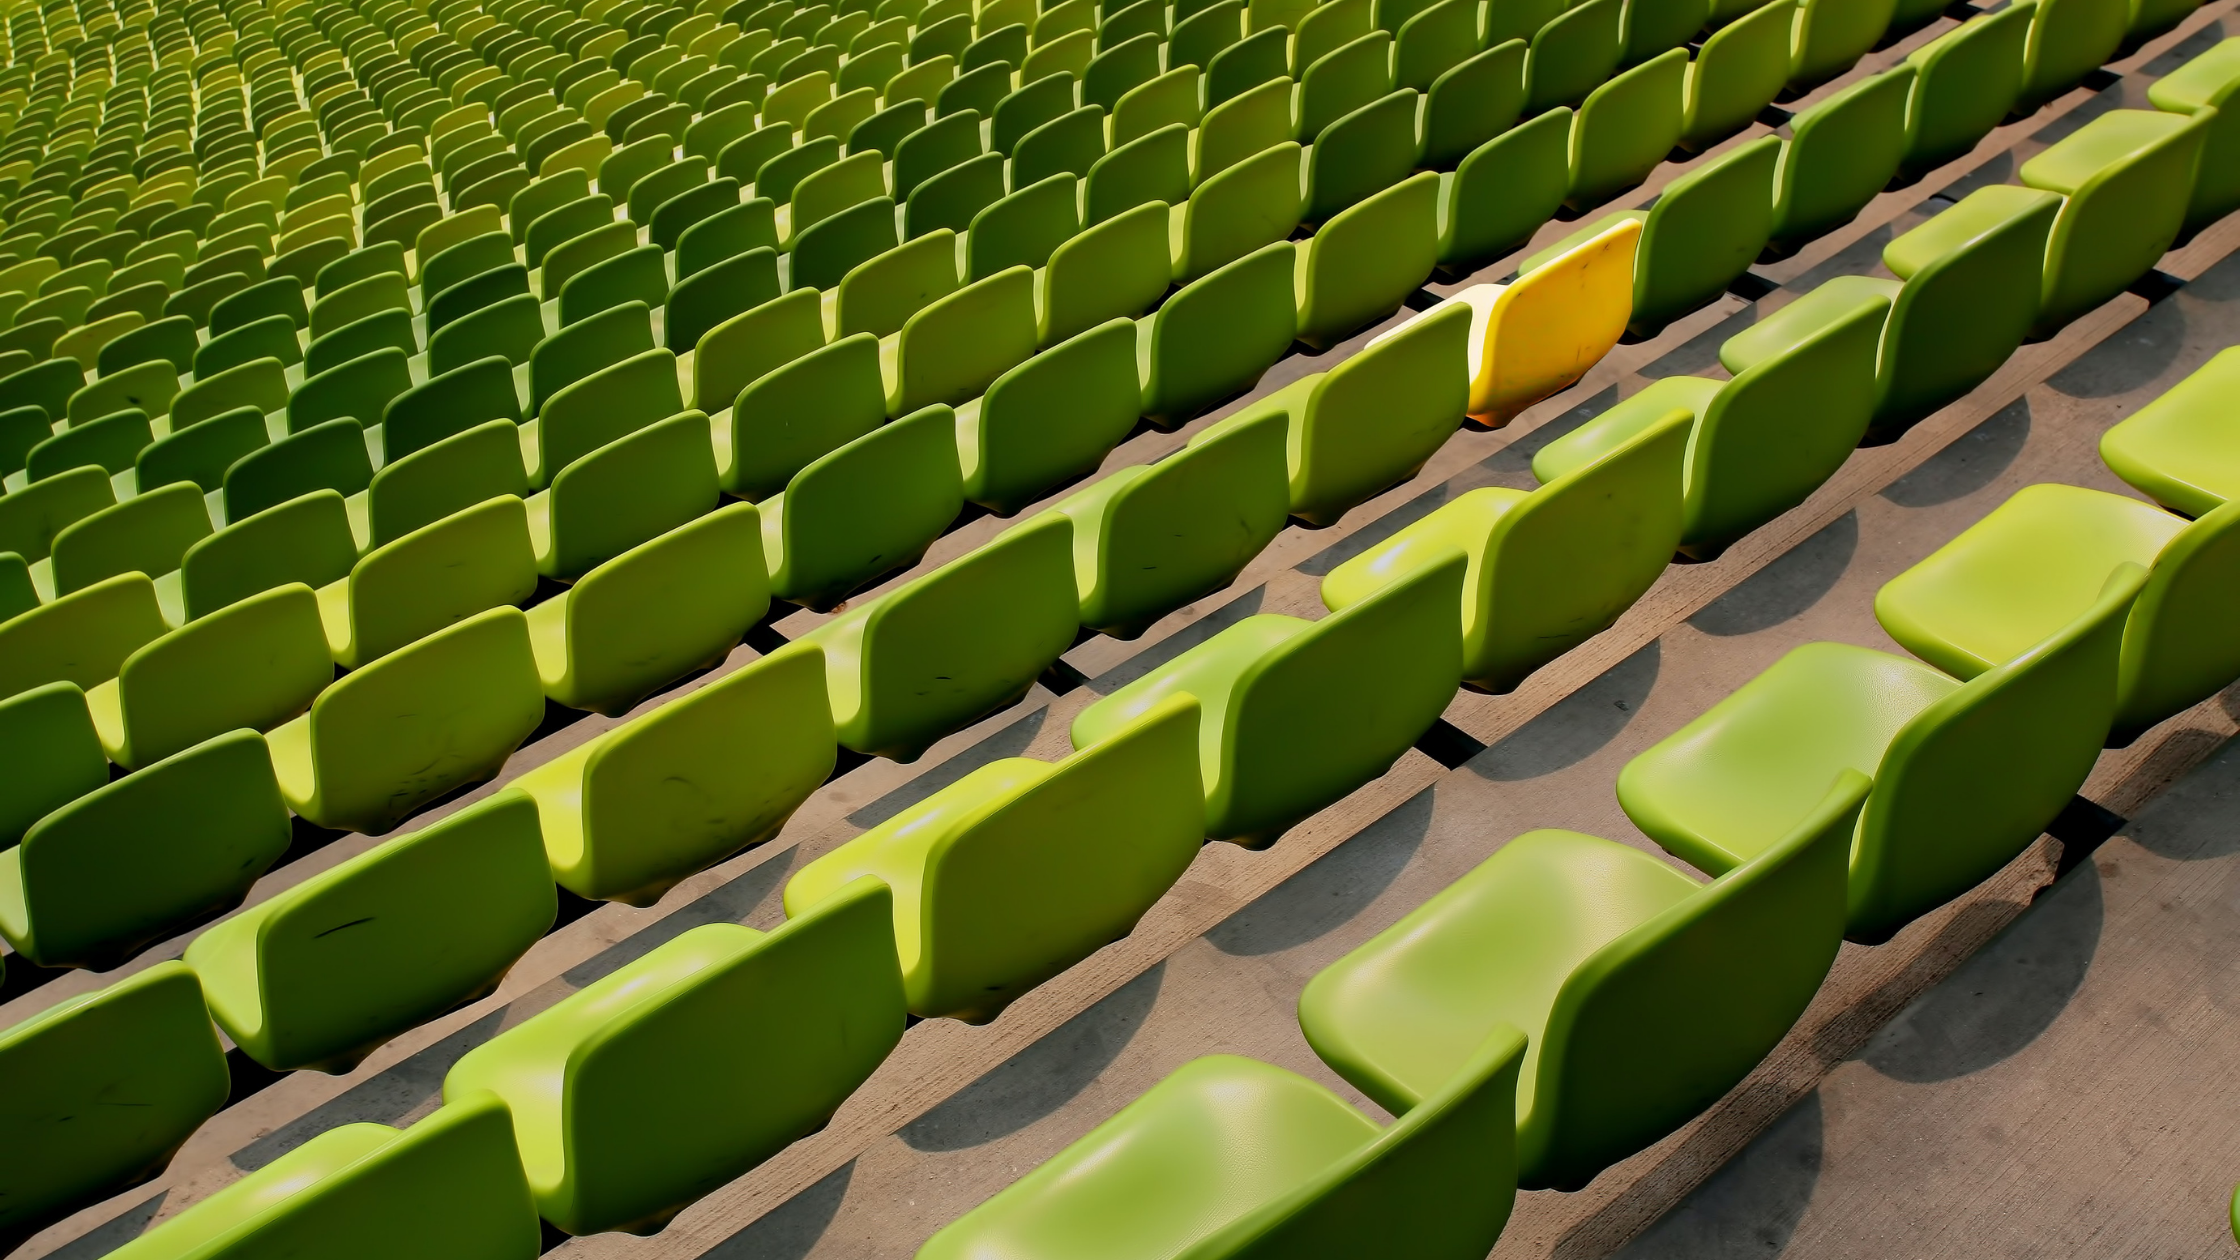 Rows of green stadium seats with one yellow seat